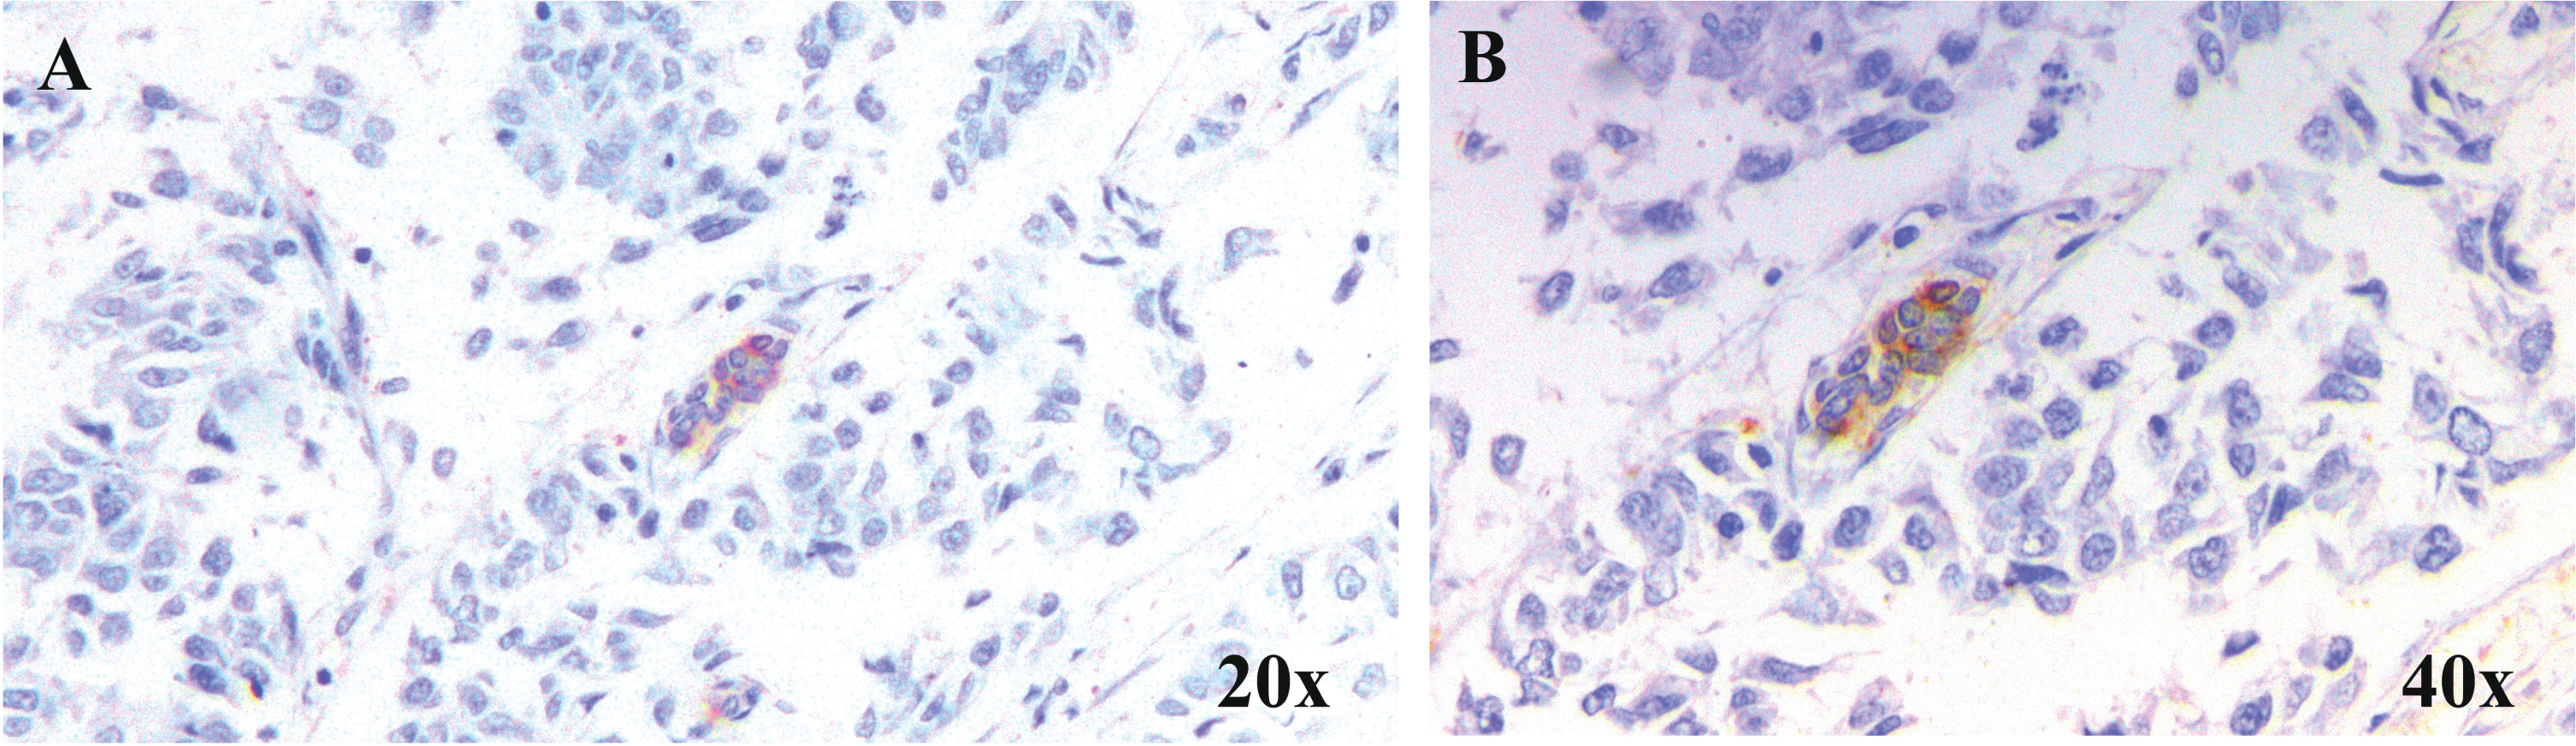 Expression of Gal-3 in tumour emboli. Representative microscopic images of breast carcinoma samples at A. 20×and B. 40×showing the expression of Gal-3 in lymphatic tumour emboli. Gal-3 expression was studied in samples by immunohistochemical method and counter-staining with haematoxylin following standard protocol.